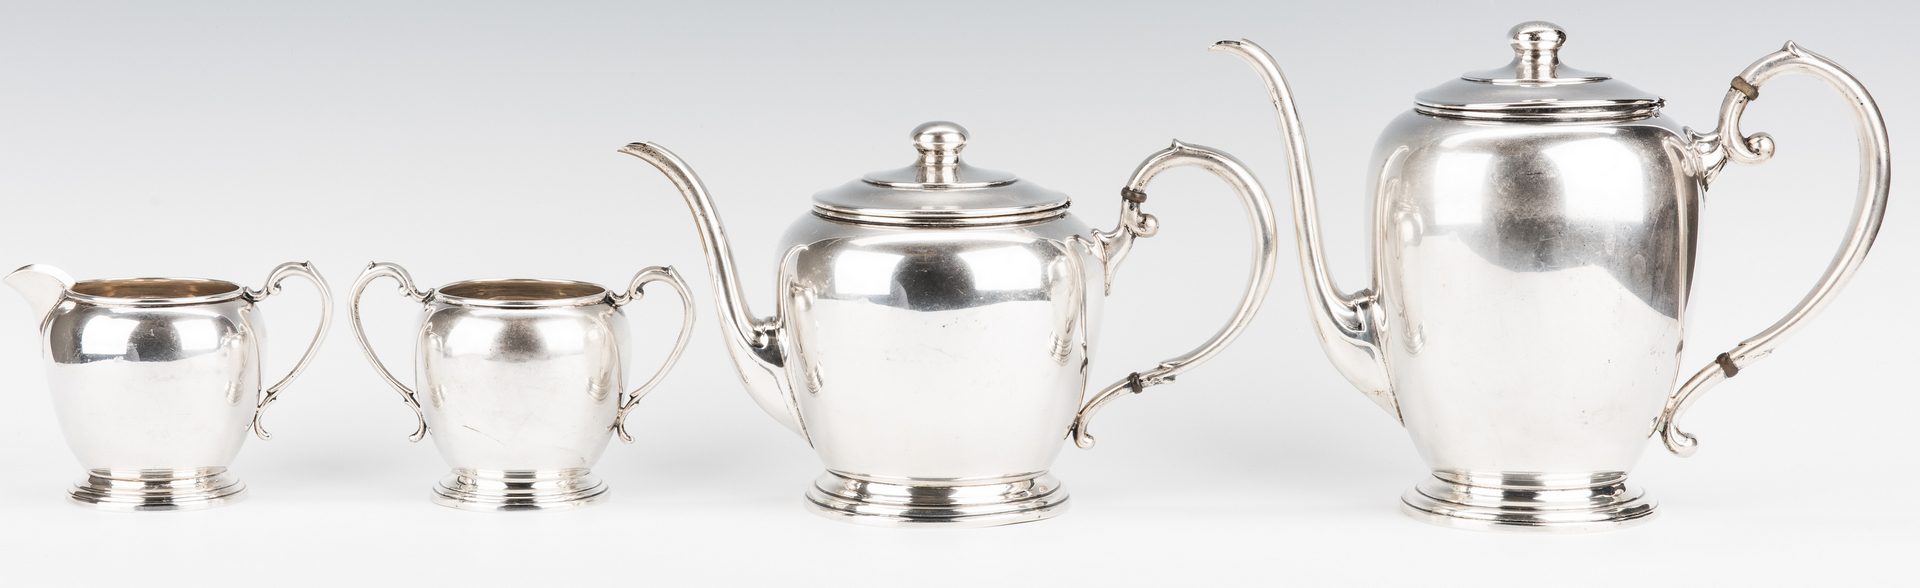 Lot 692: 4 pc Manchester Sterling Coffee/Tea Set